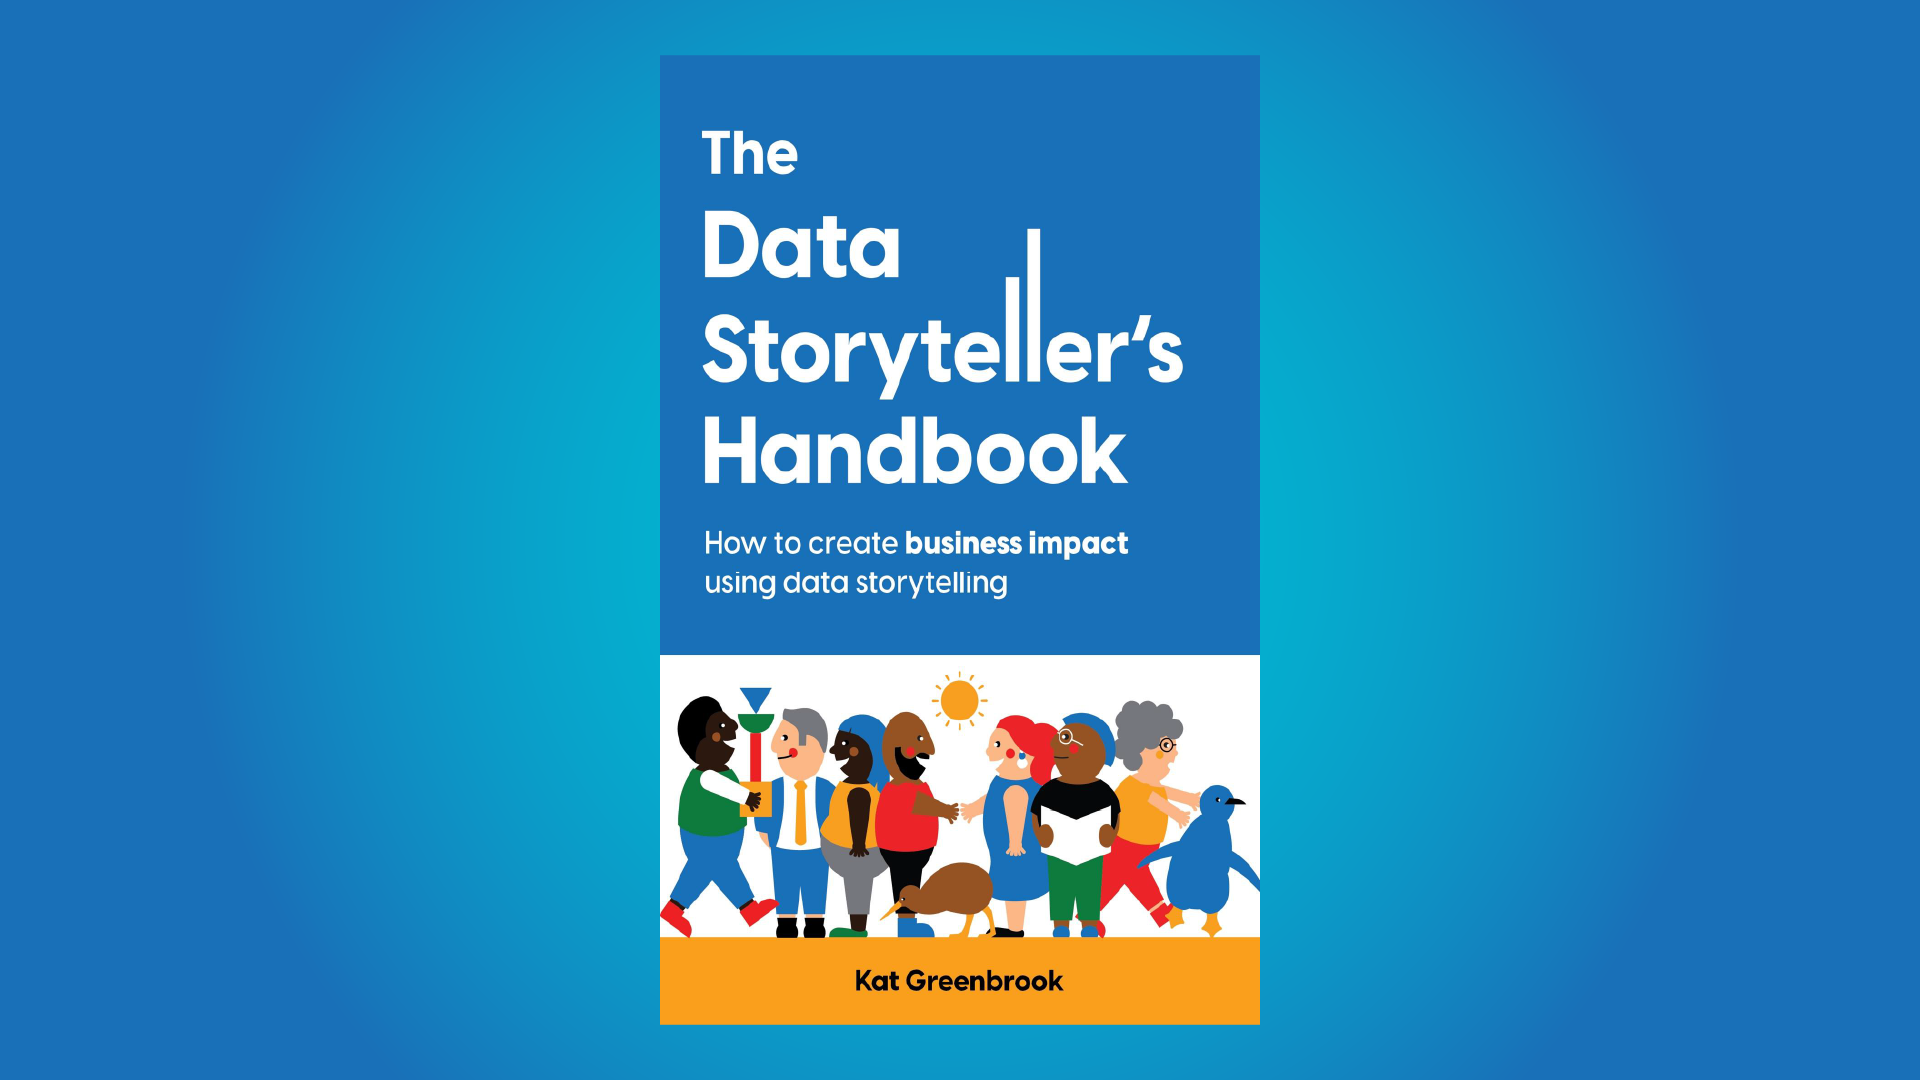 A book cover which reads "The Data Storyteller's Handbook: How to create business impact using data storytelling by Kat Greenbrook" along with diverse illustrations of different people kindly interacting, a kiwi and a penguin.